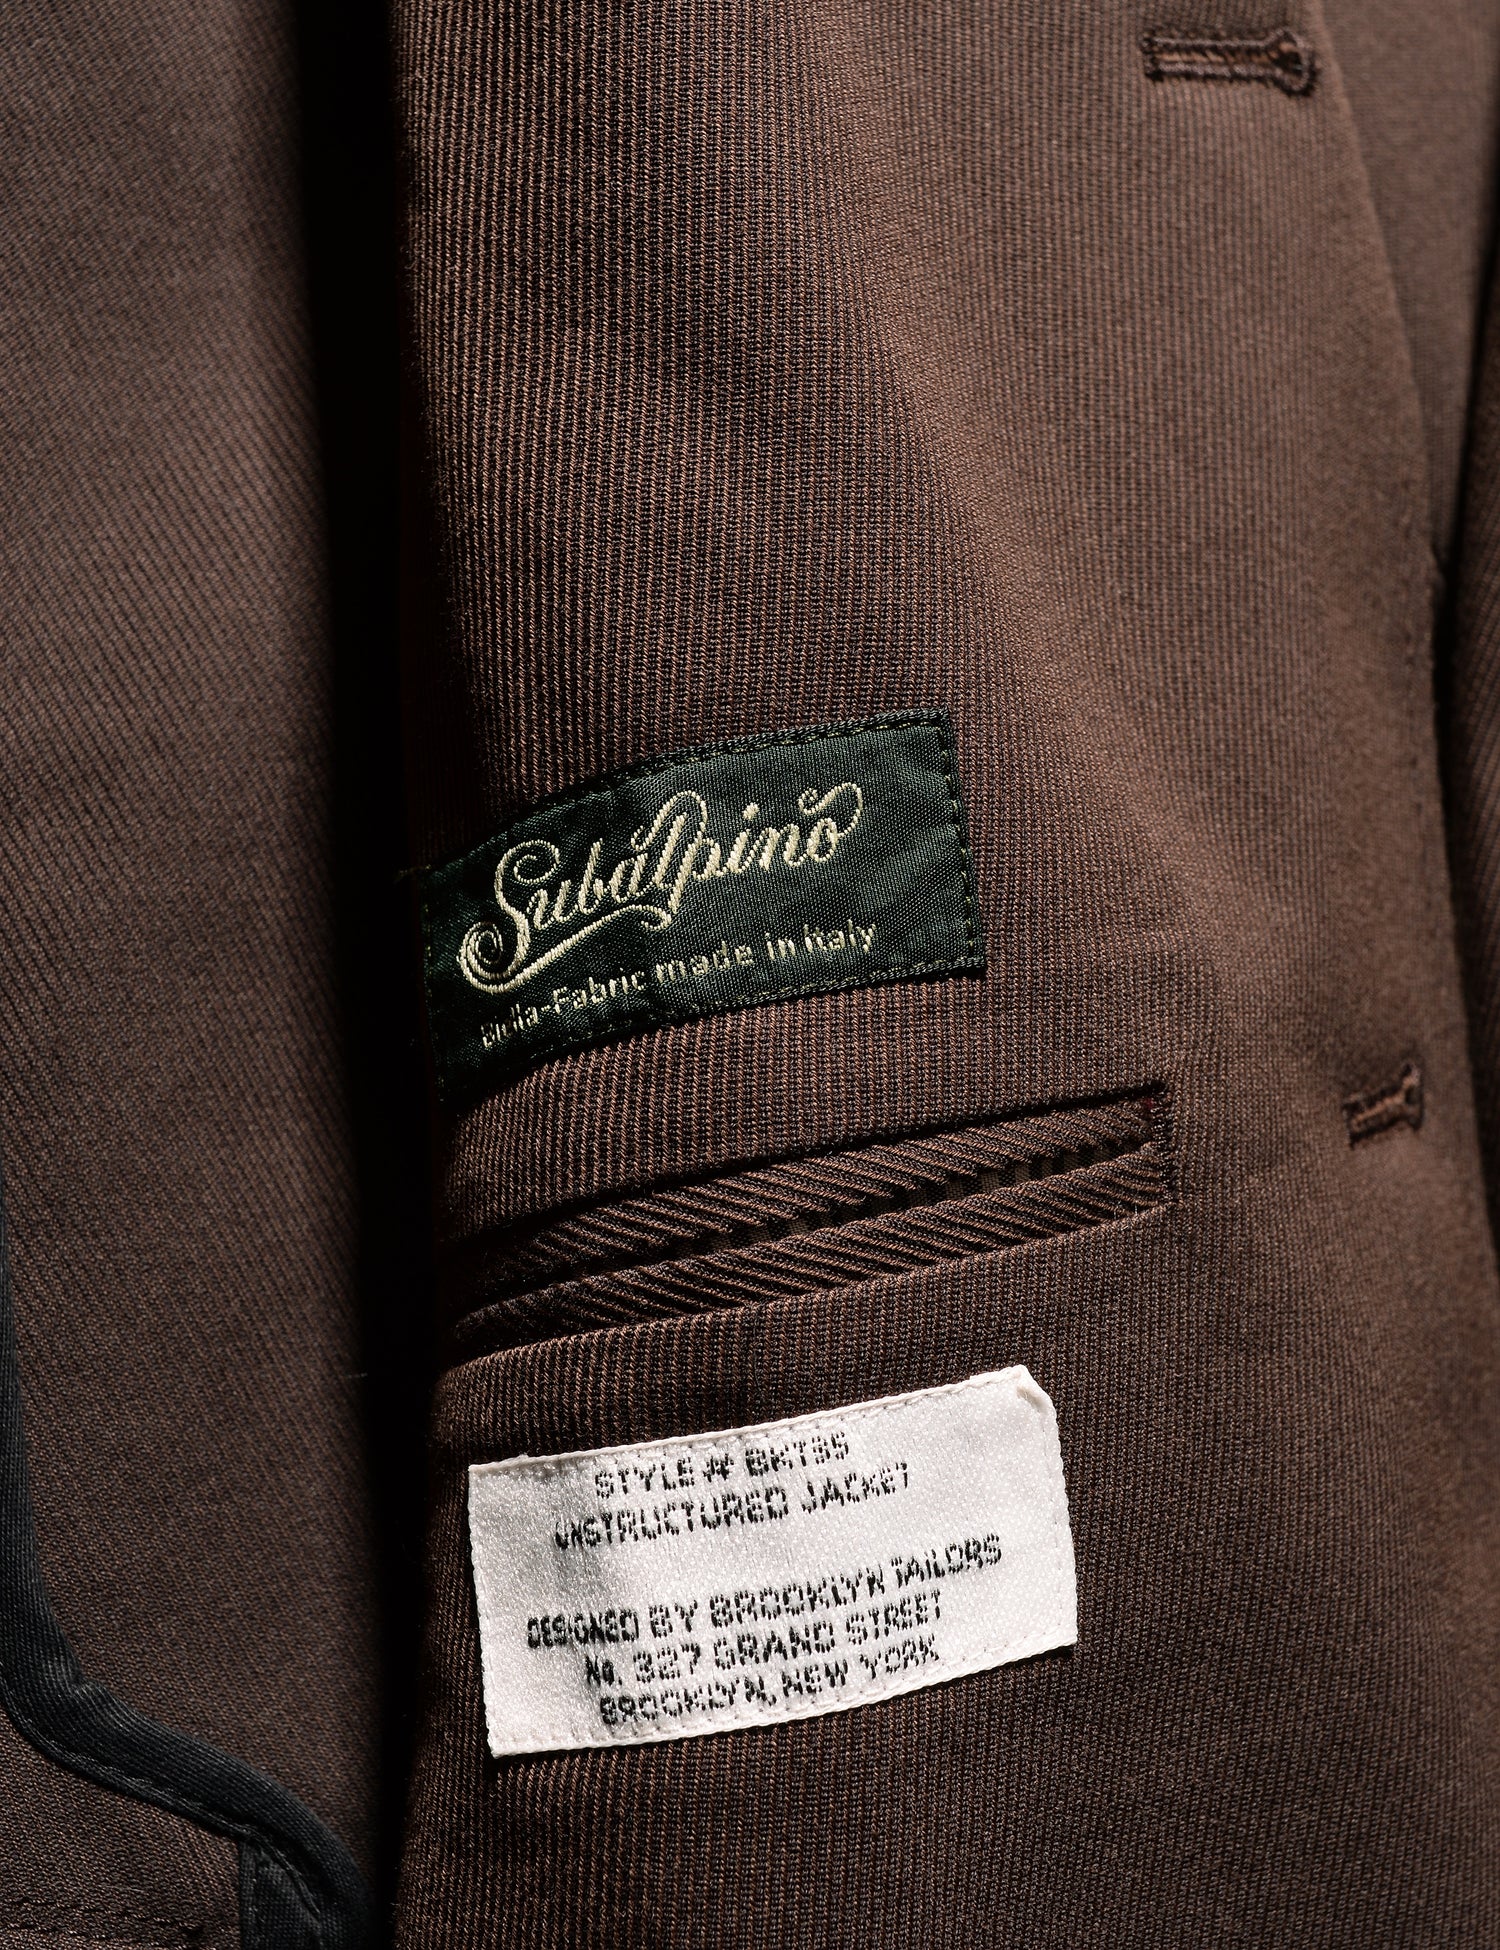 Detail of BKT35 Unstructured Jacket in Cavalry Twill - Rosewood showing Subalpino label on interior panel